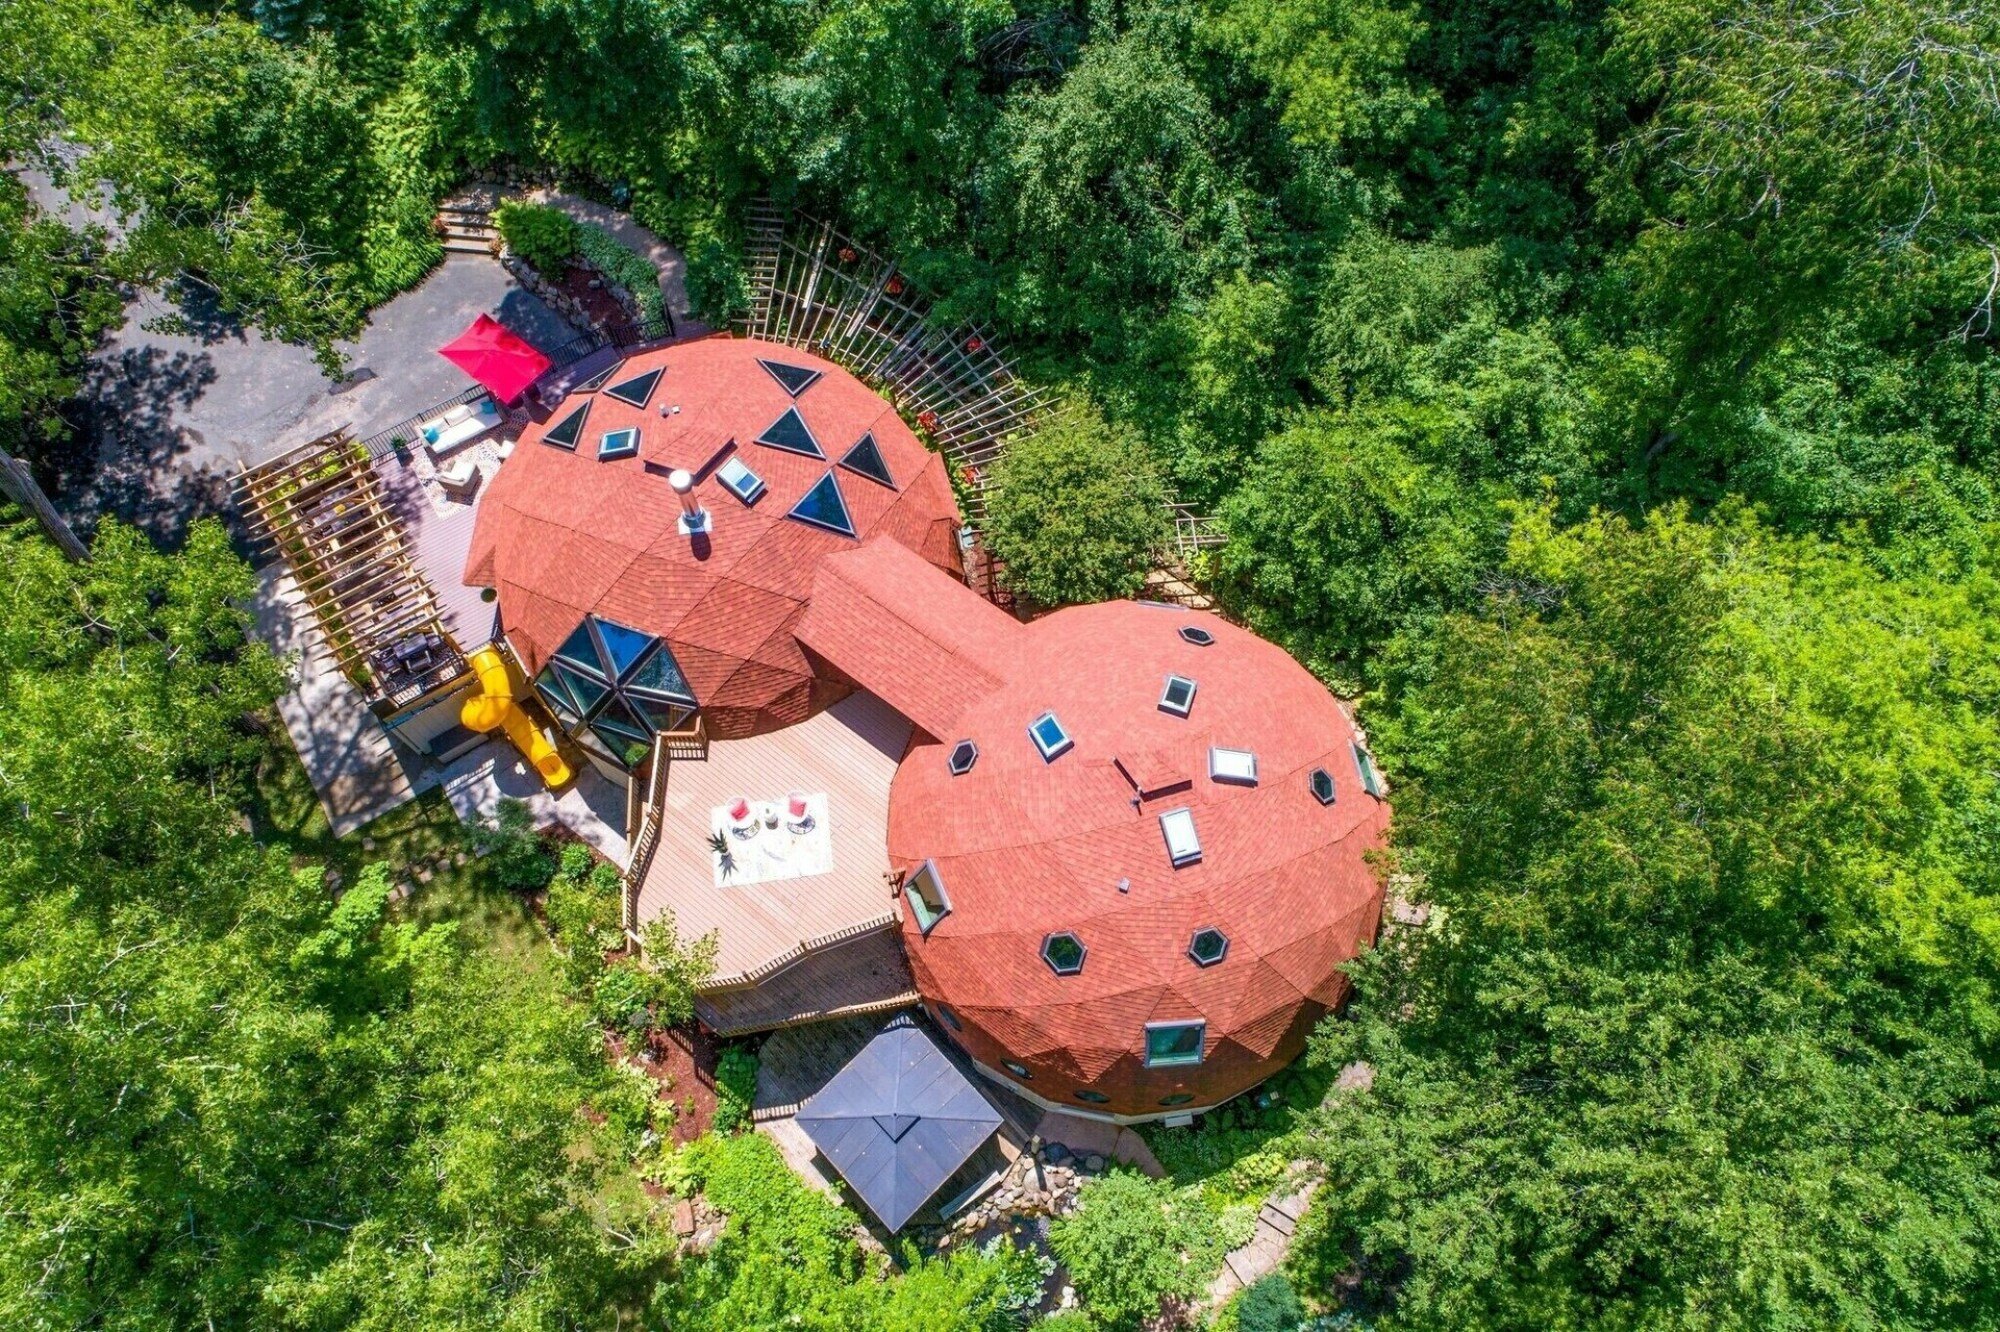 VRBO listing consisting of two geodesic domes connected by a covered path.